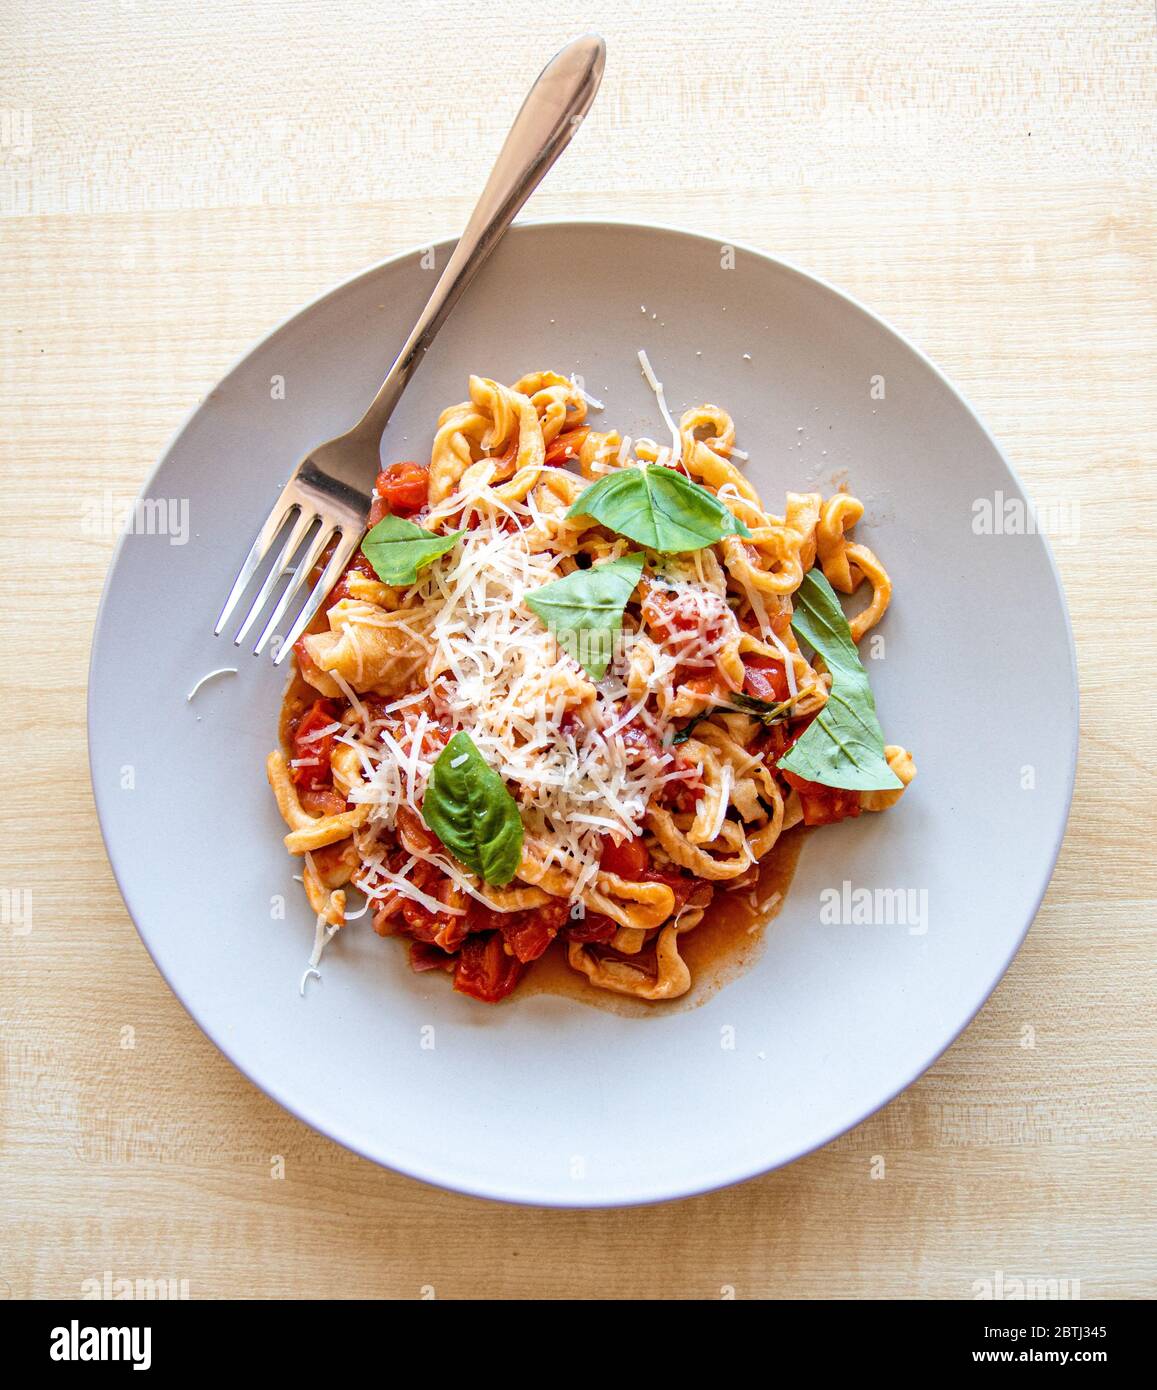 A fresh plate of delicious pasta with tomato and basil sauce made the traditional Italian way Stock Photo